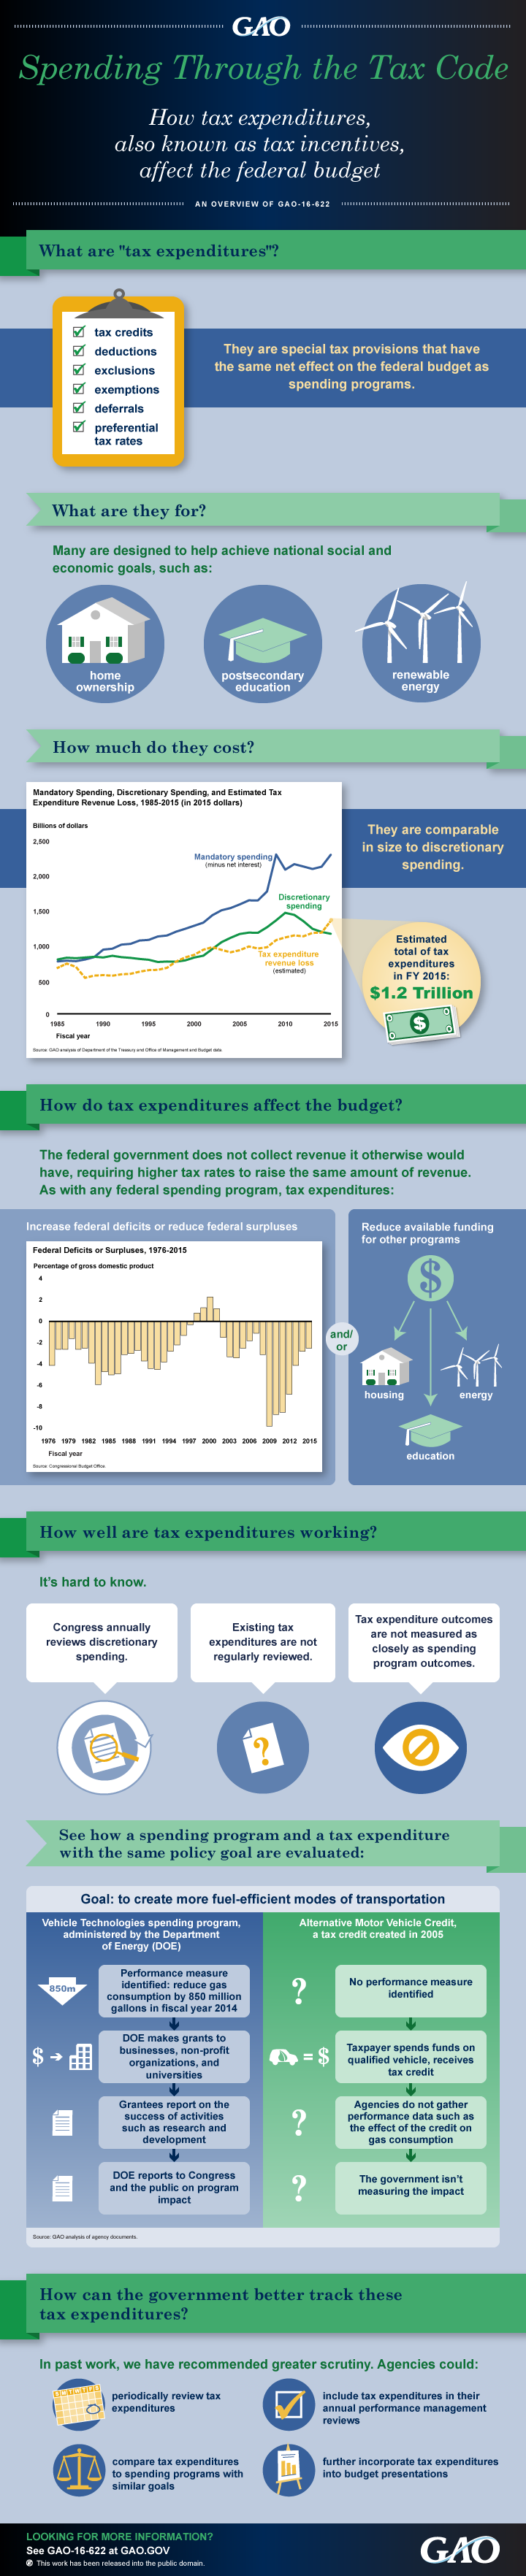 INFOGRAPHIC: Spending Through the Tax Code